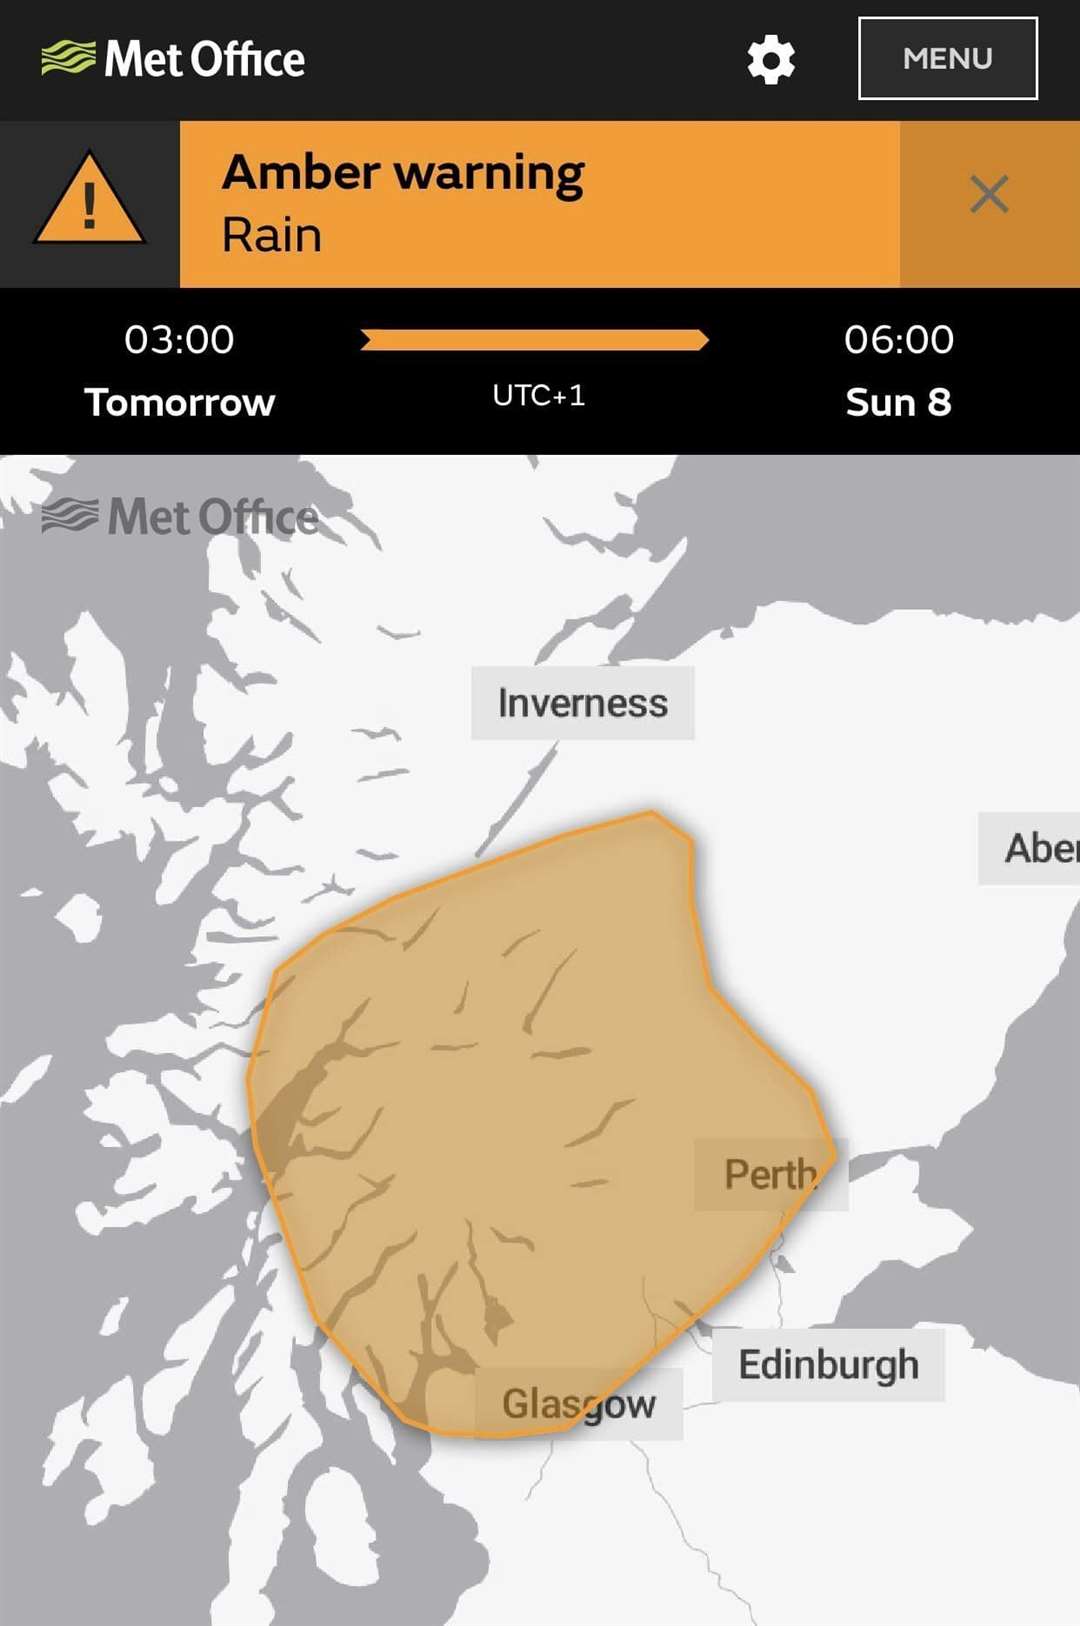 Amber warning covers west central Scotland